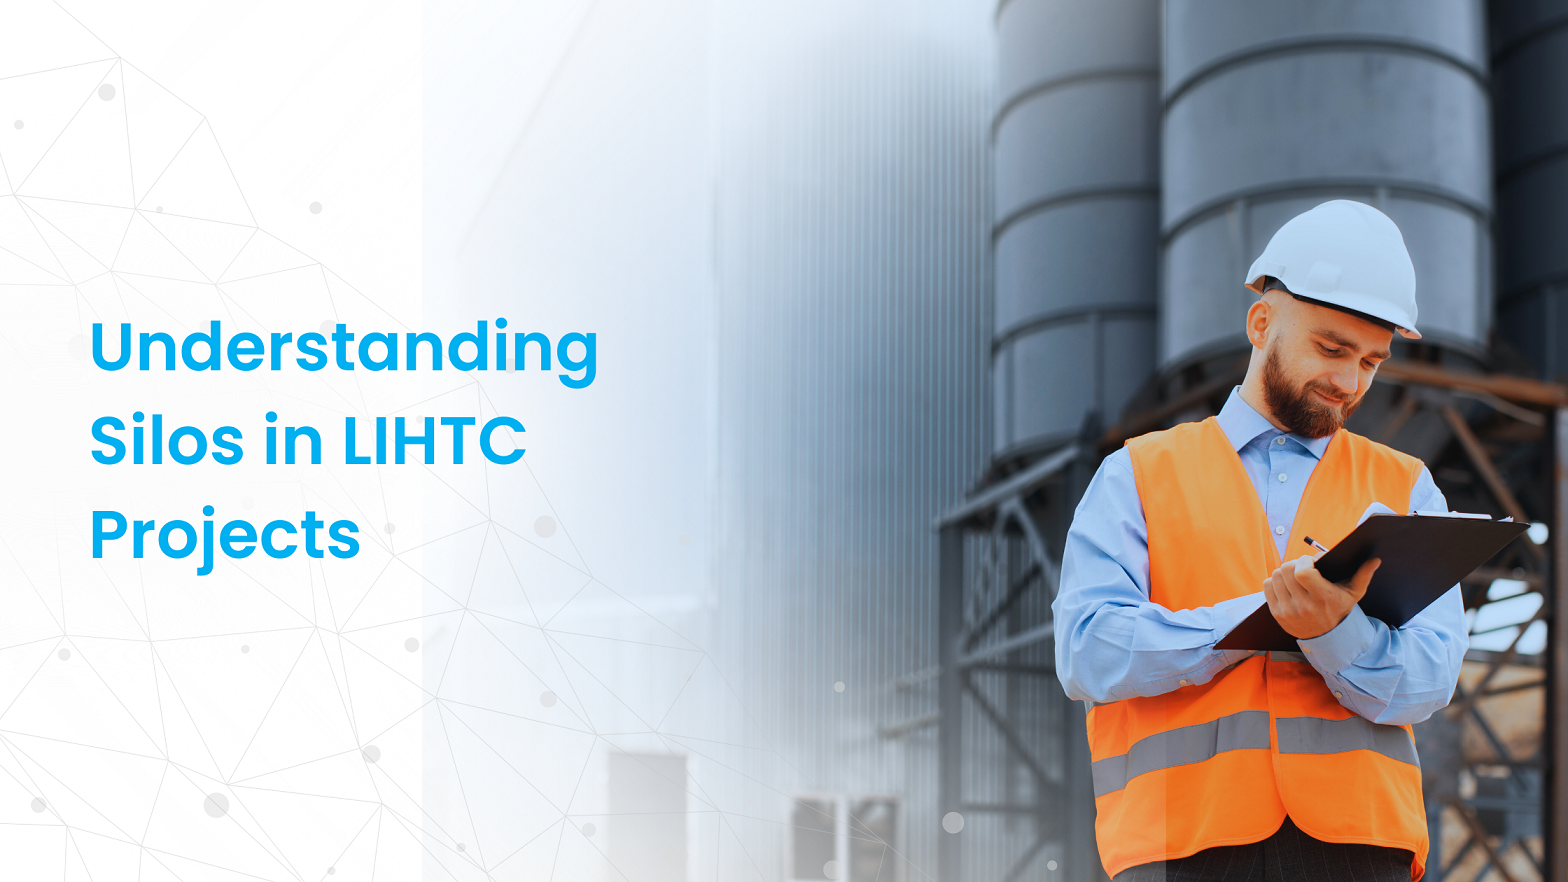 Your Guide to Understanding Silos in LIHTC Projects